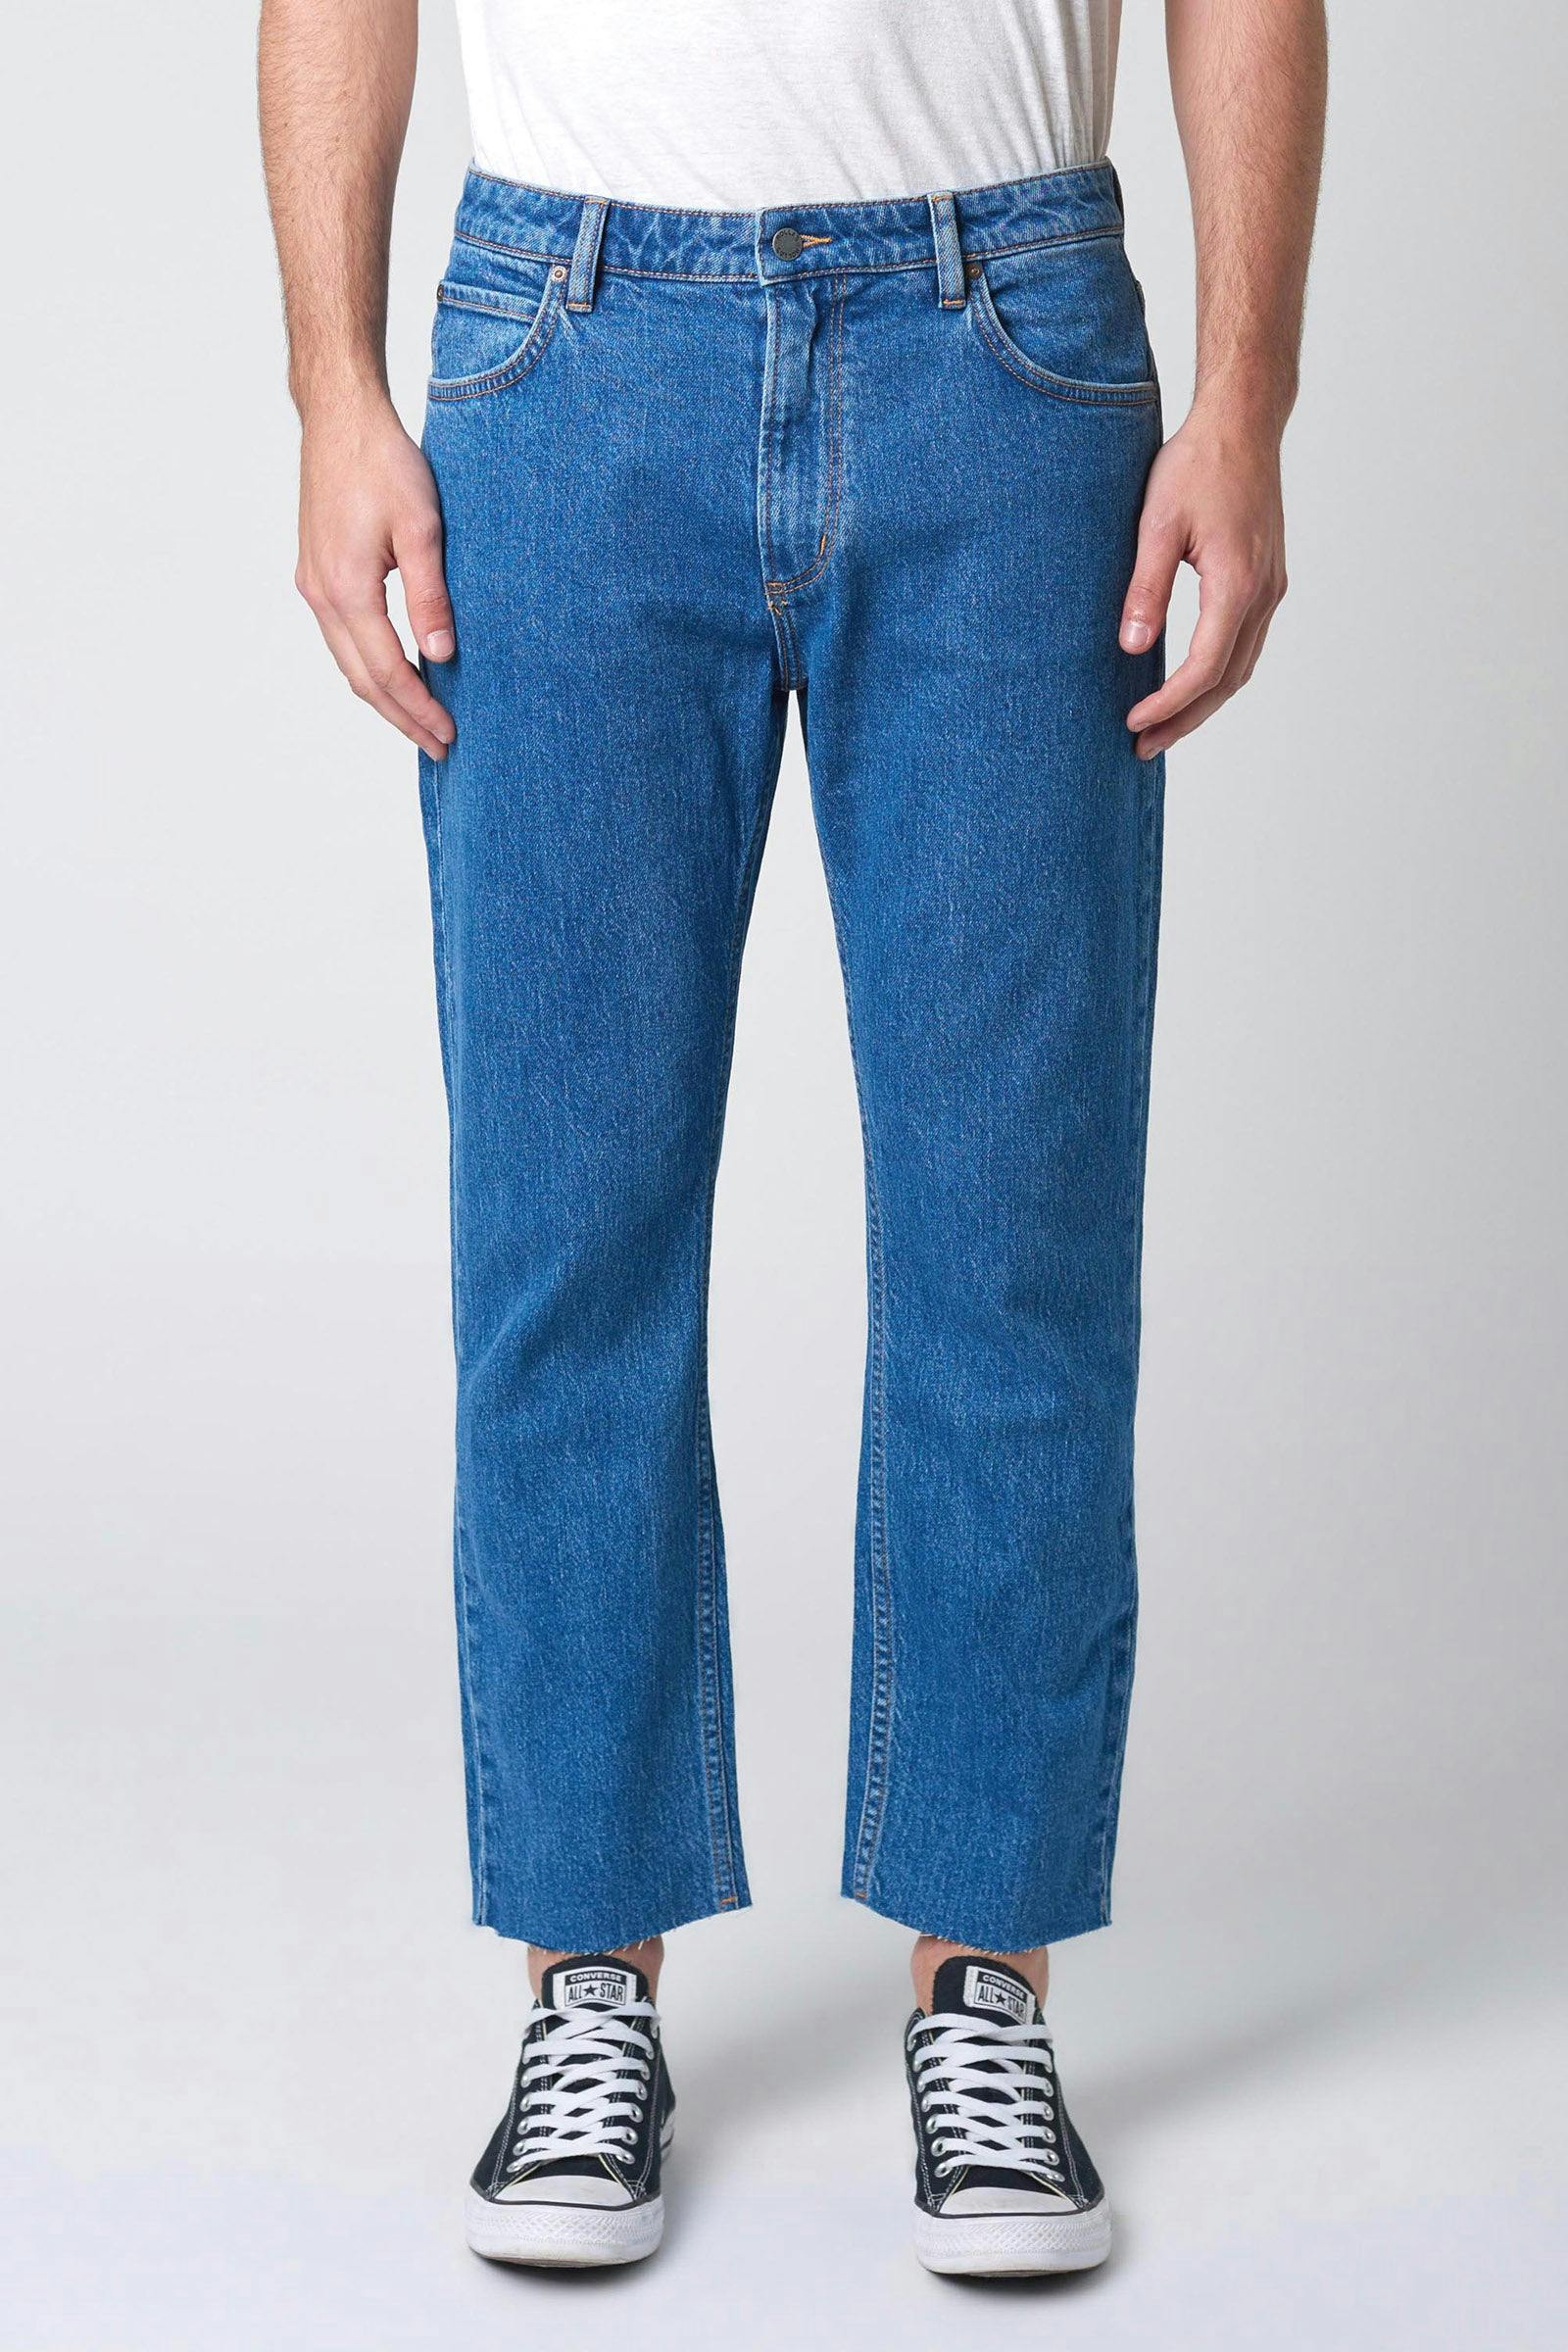 Rolla’s Jeans | Take a further 20% off sale*